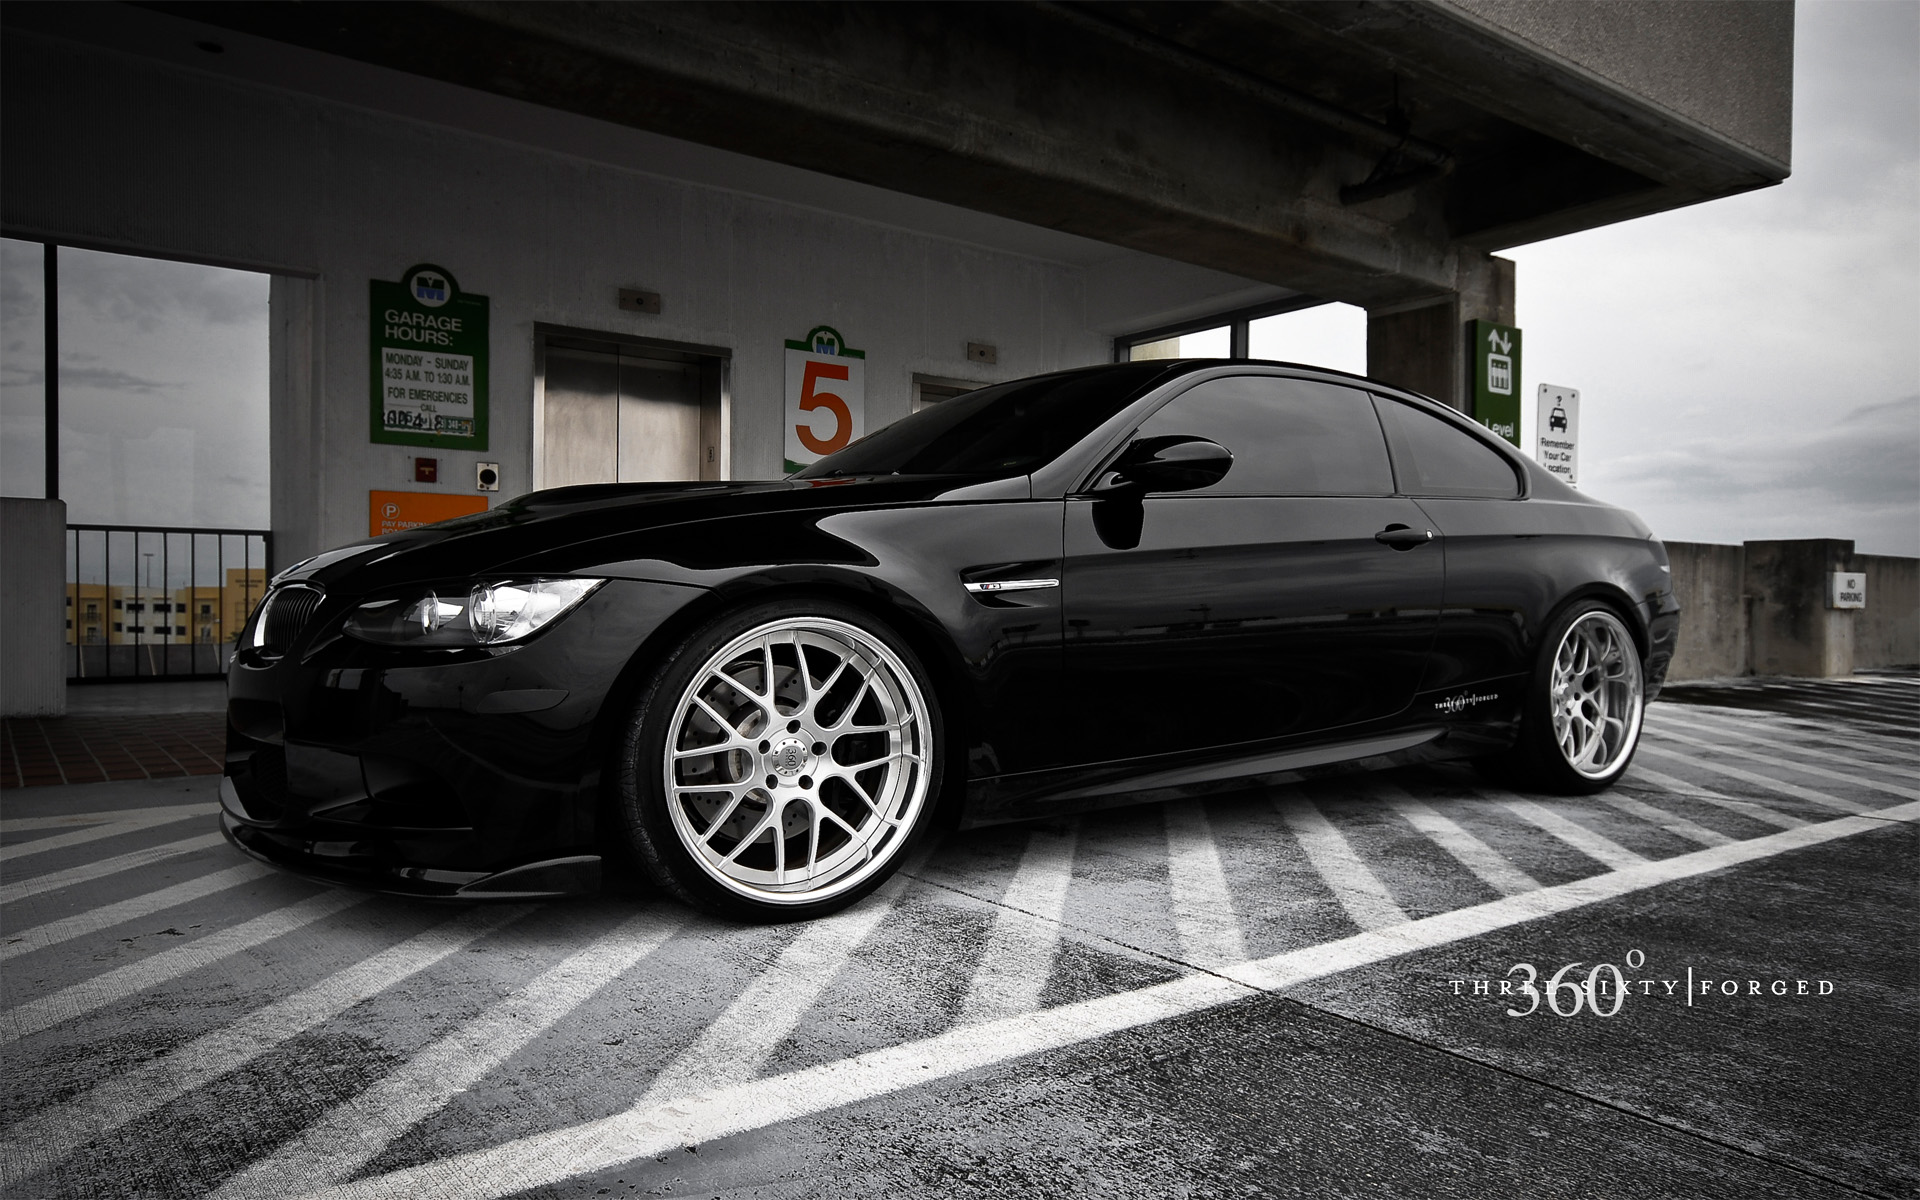 Black Bmw Android Wallpapers, Black Bmw Picture - Bmw Black 360 Forged - HD Wallpaper 